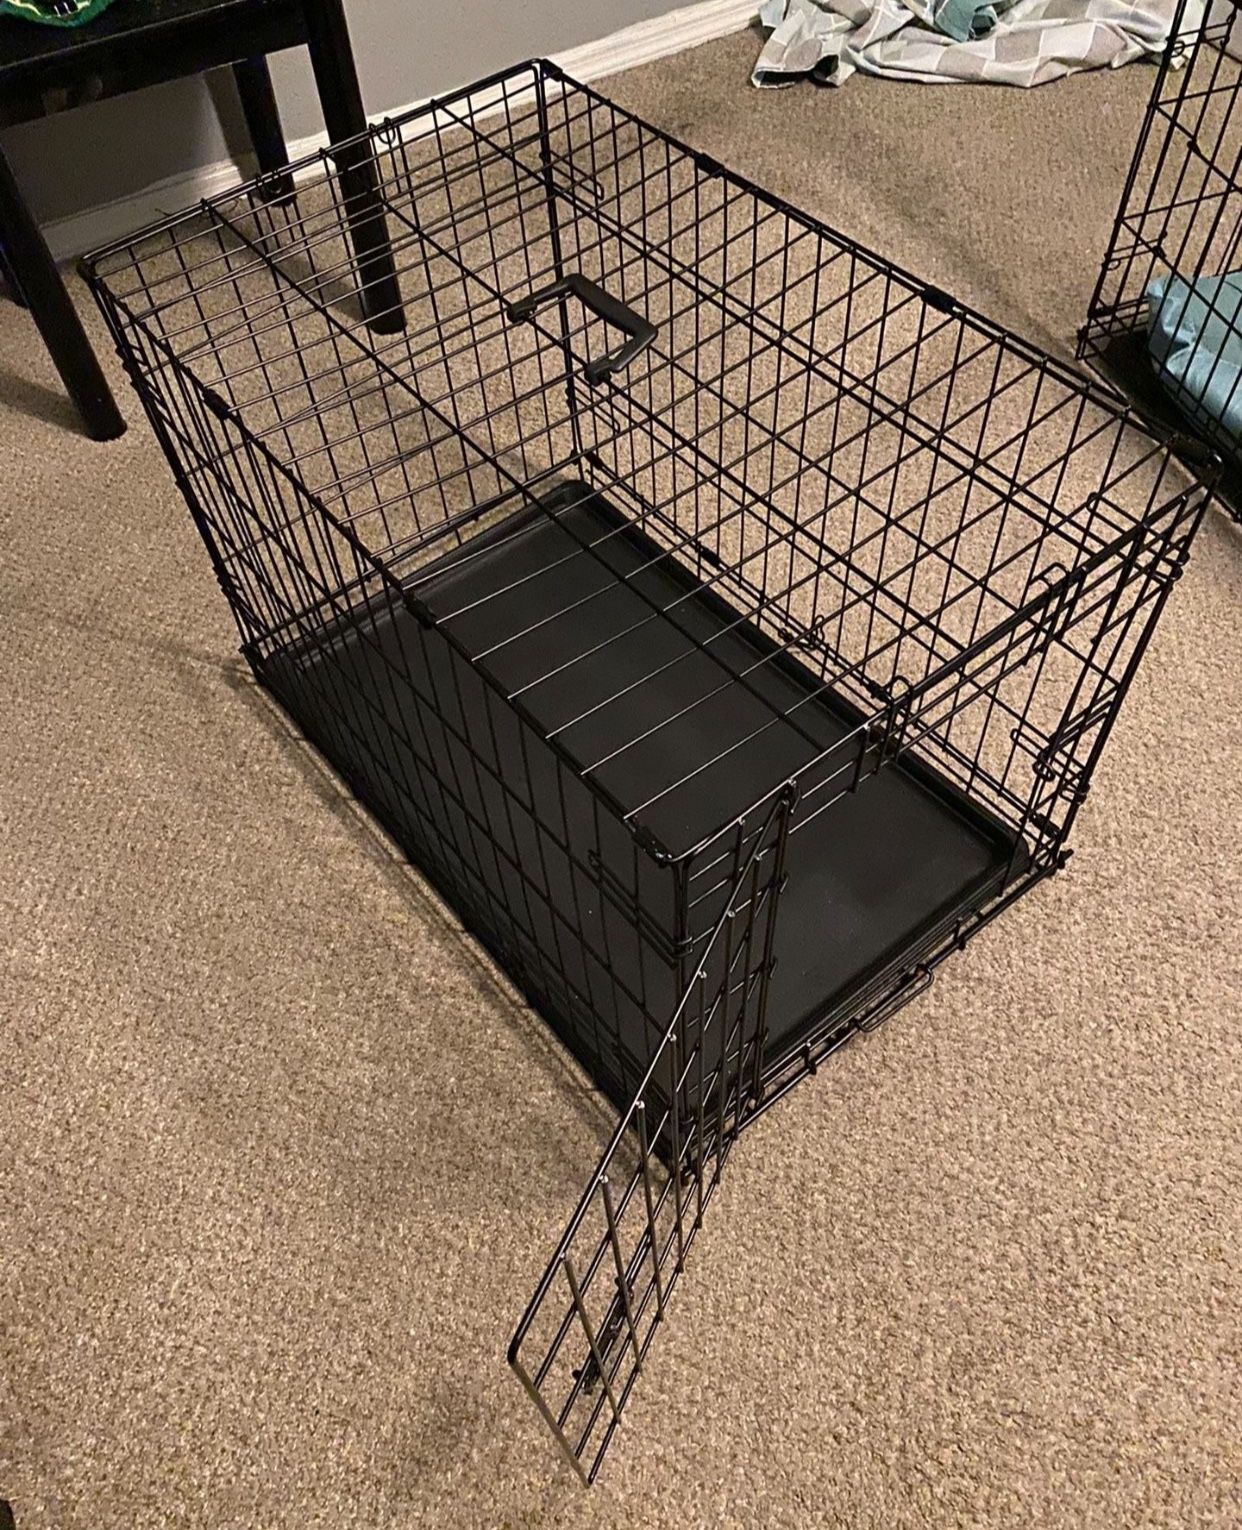 30” Inch Dog Crate / Cage